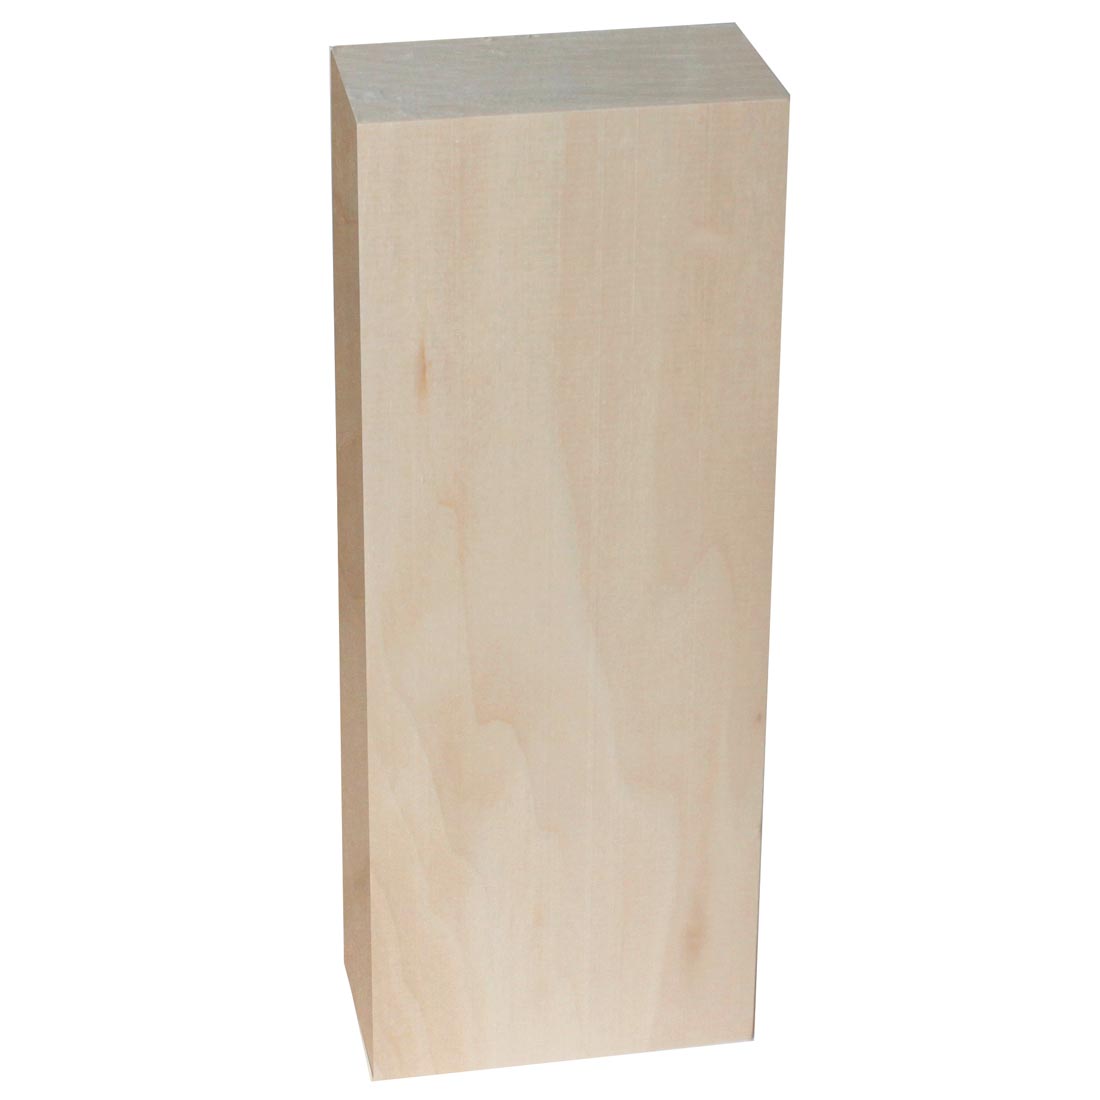 3 x 10 x 1-3/4" solid Basswood Carving Block by Walnut Hollow